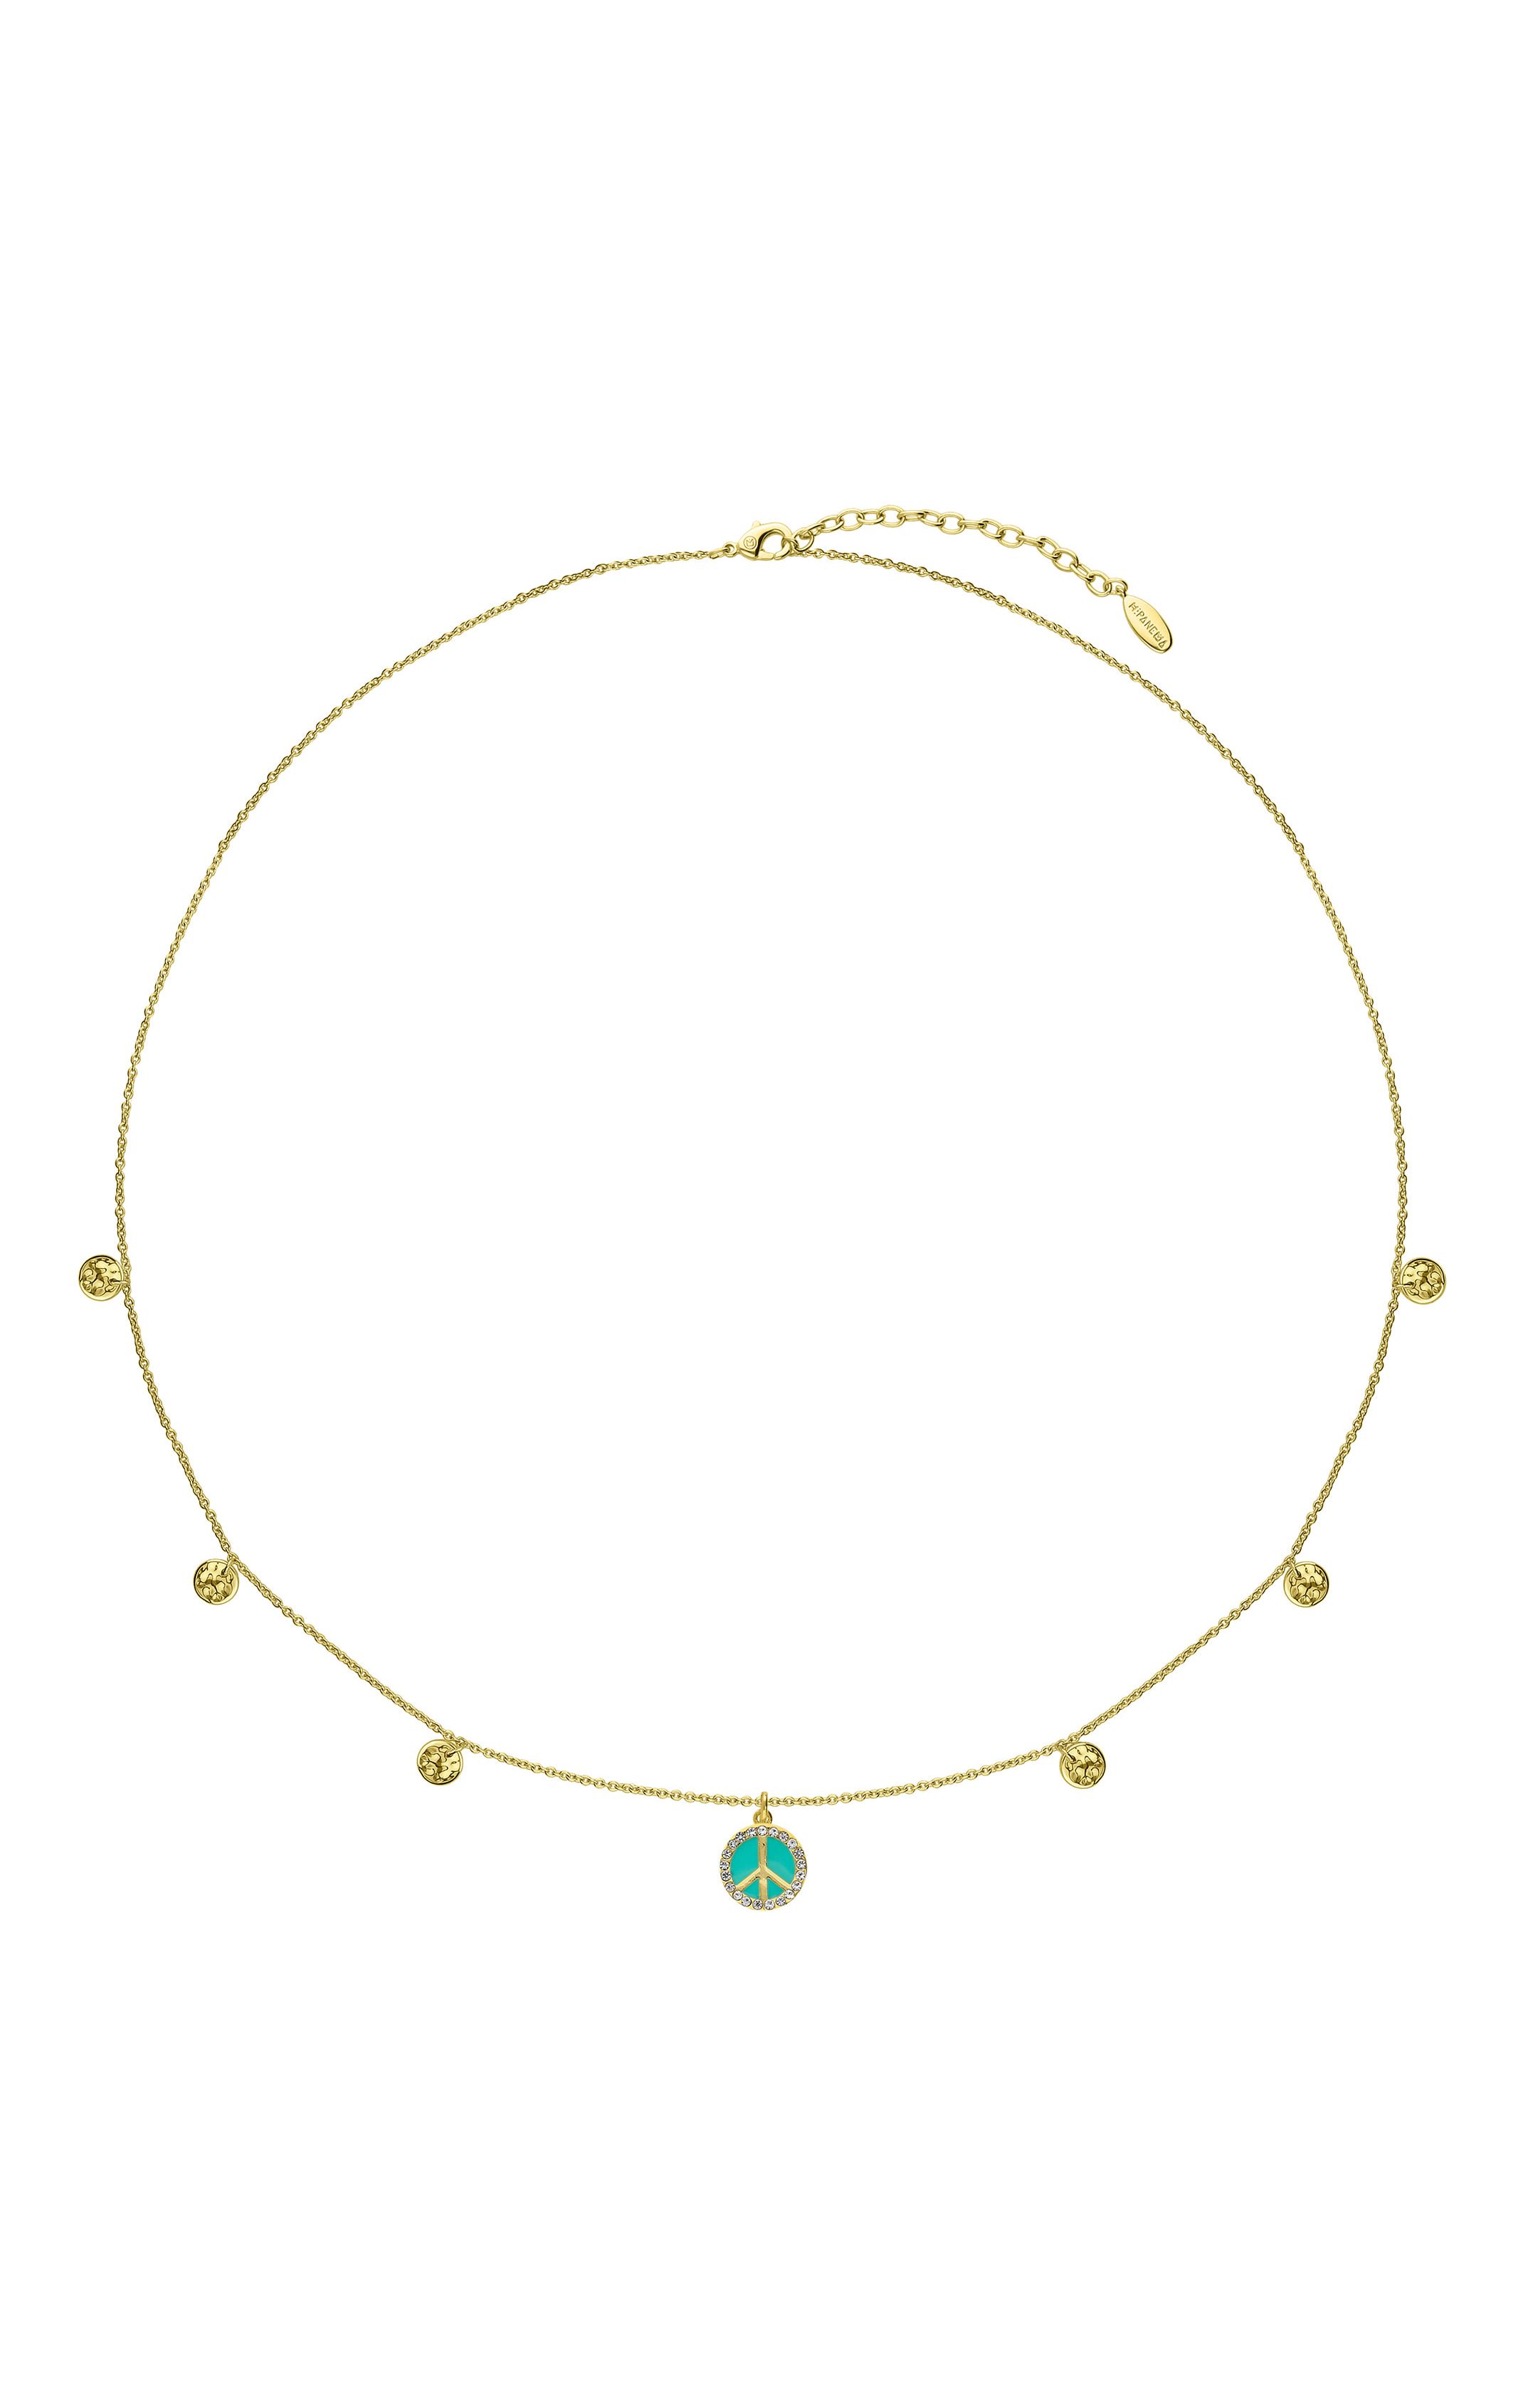 Collier Serenity Bleu Turquoise